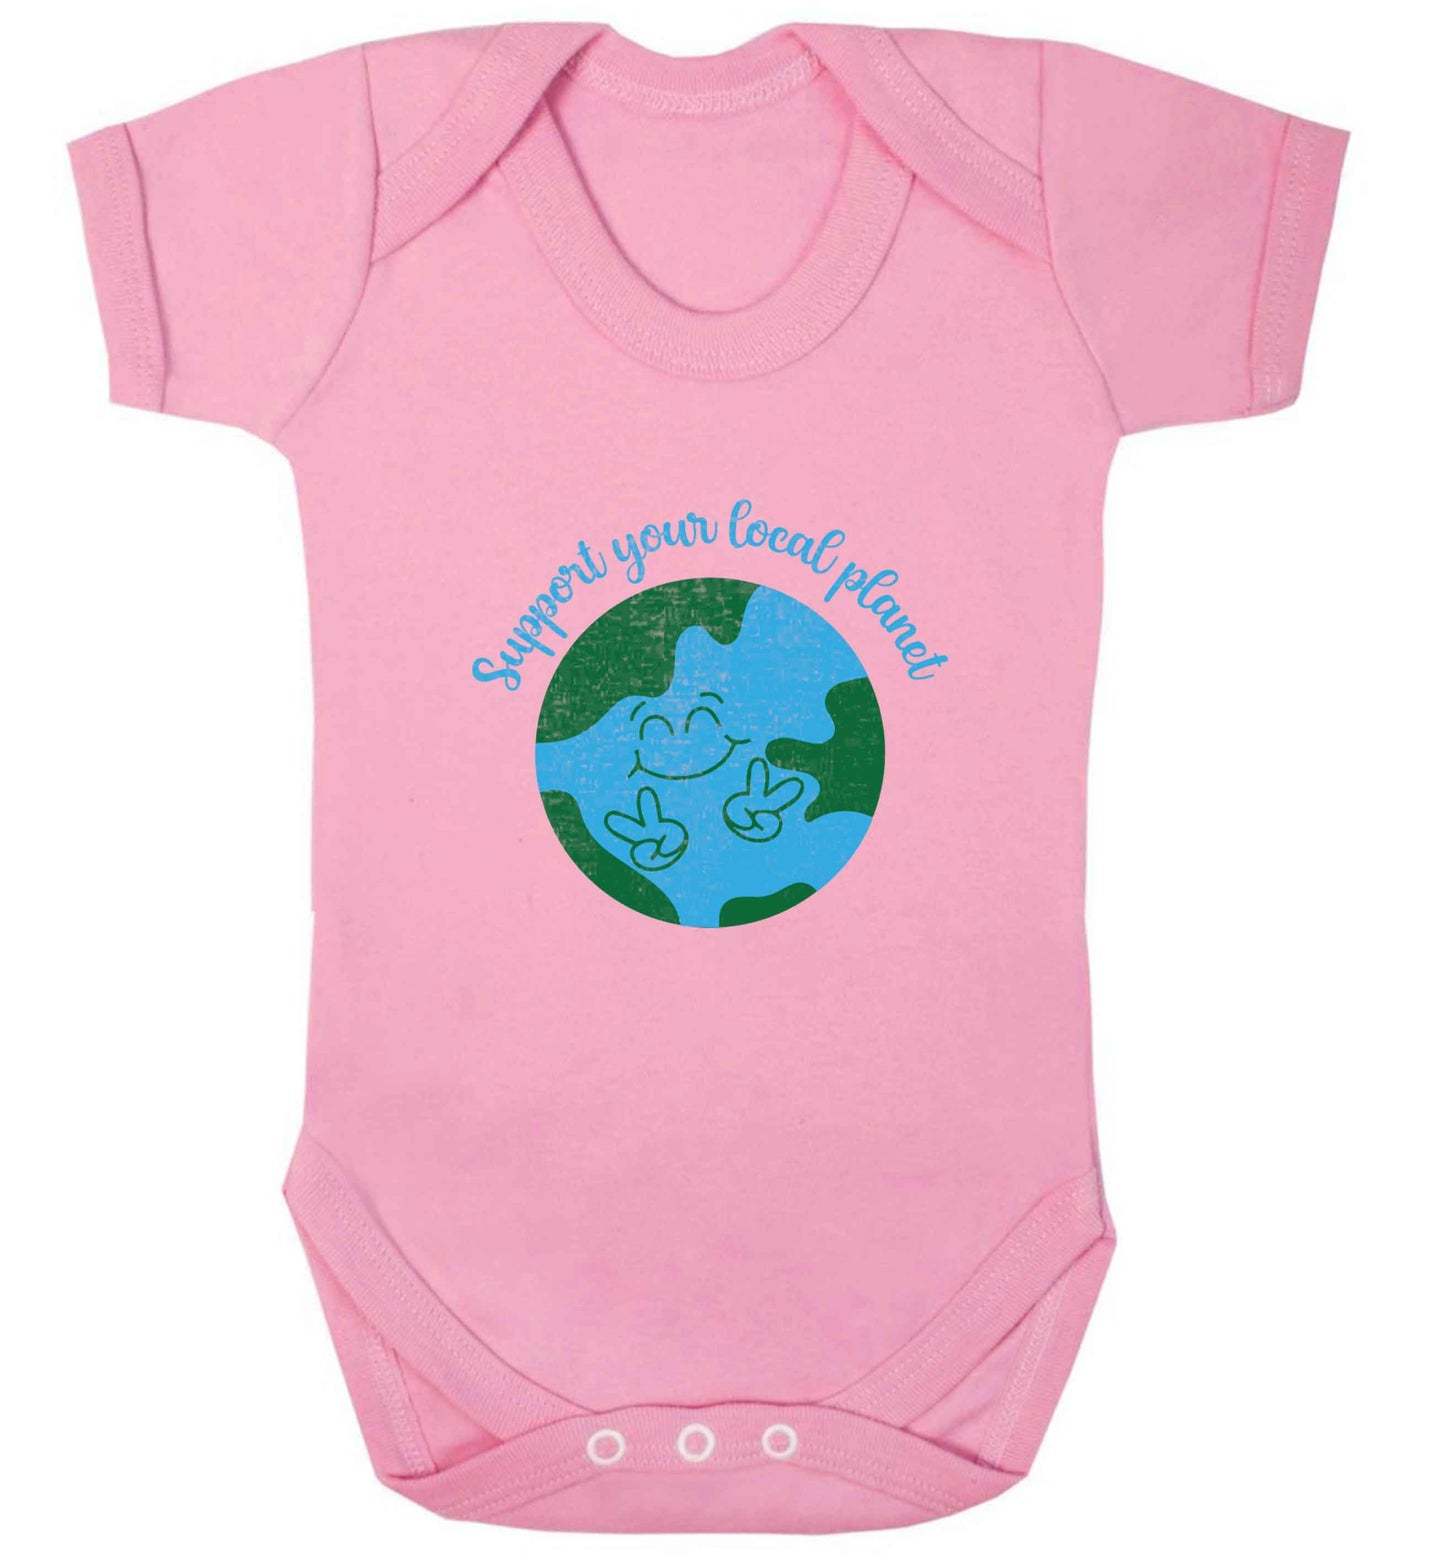 Support your local planet baby vest pale pink 18-24 months